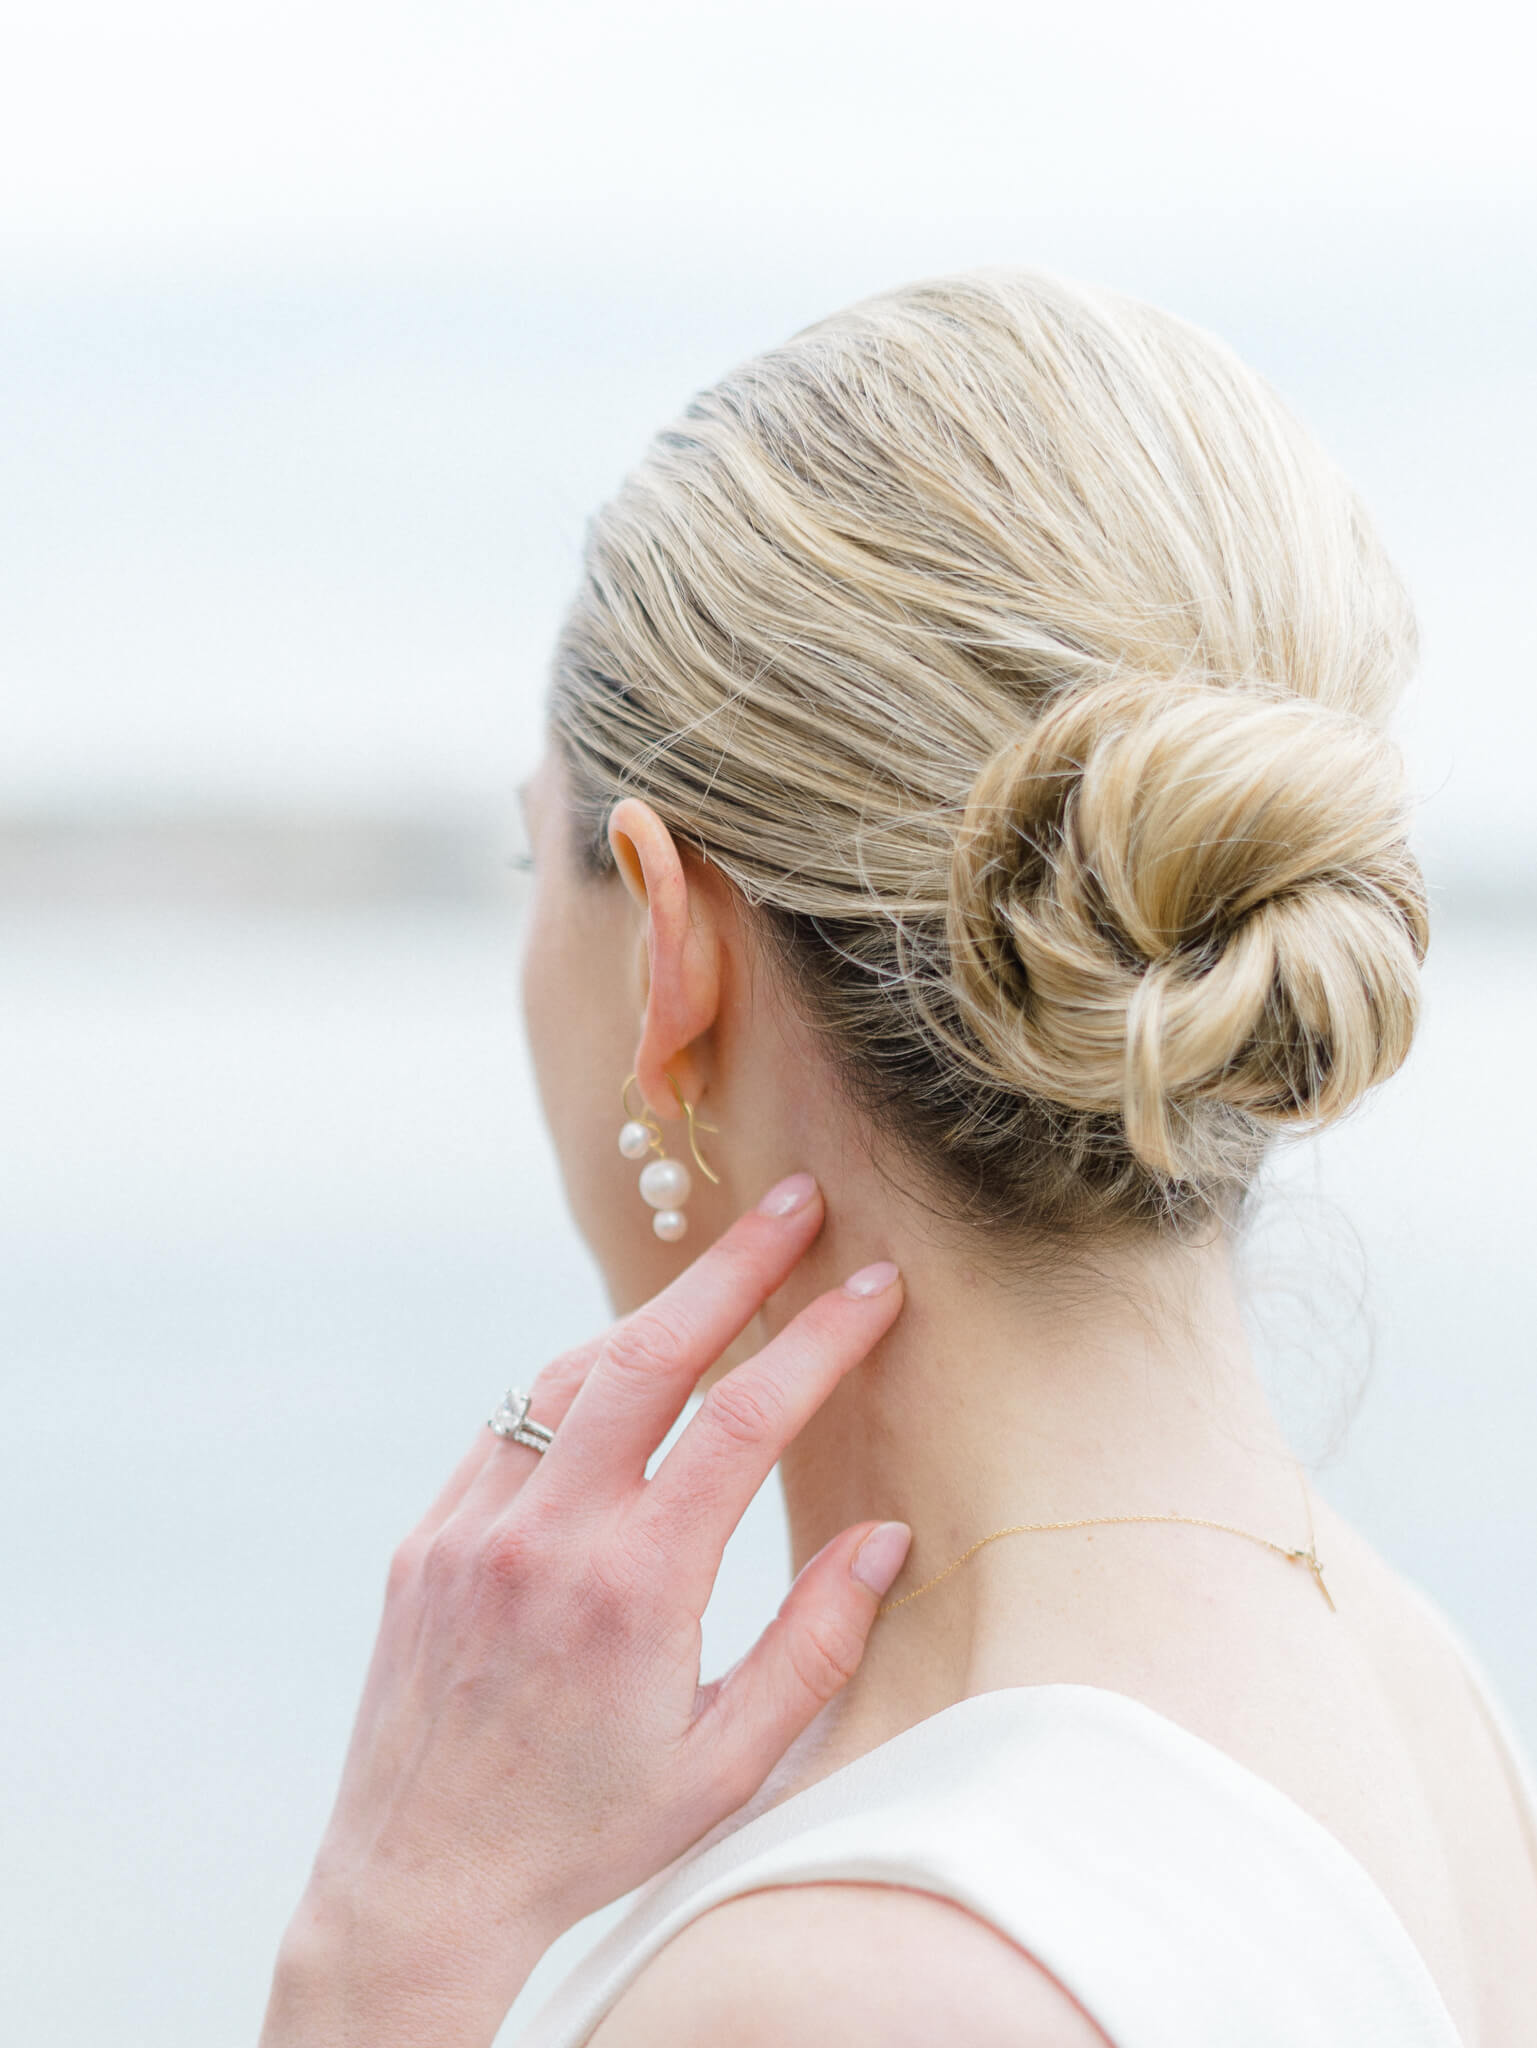 The back of the head of a bride, showing her wedding updo while she touches her neck and looks out over the Tidal Basin